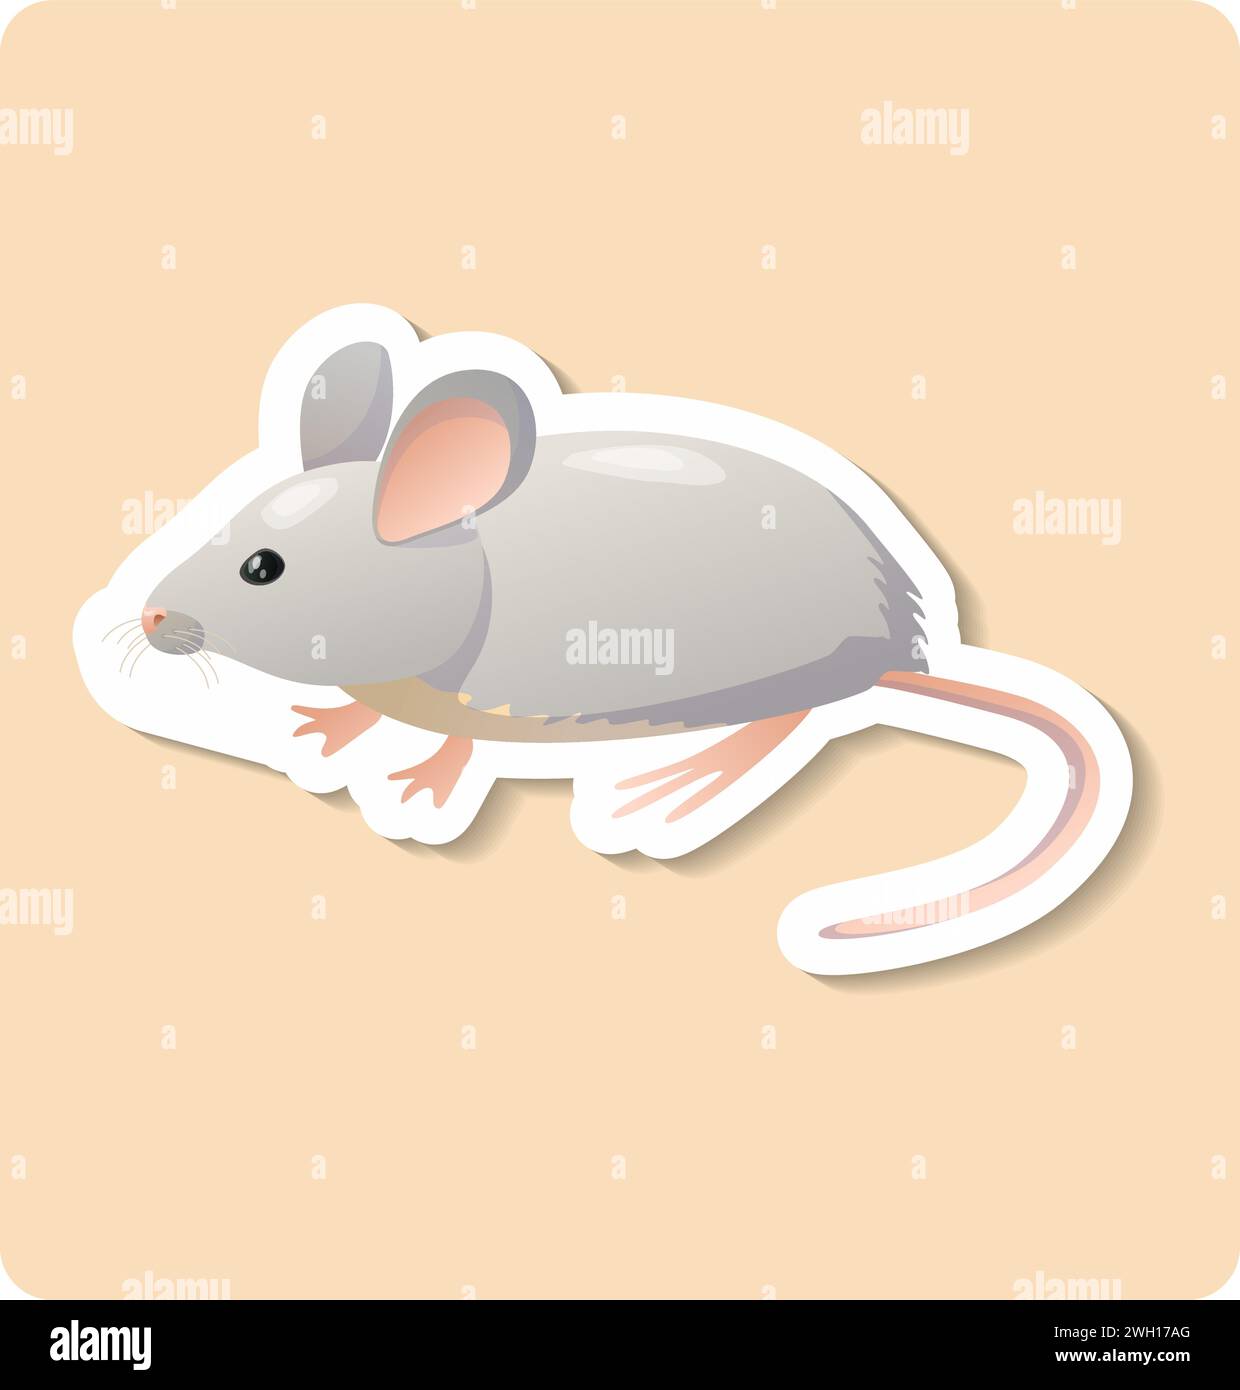 Mouse sticker illustration. Animal, ears, tail, nose. Editable vector graphic design. Stock Vector